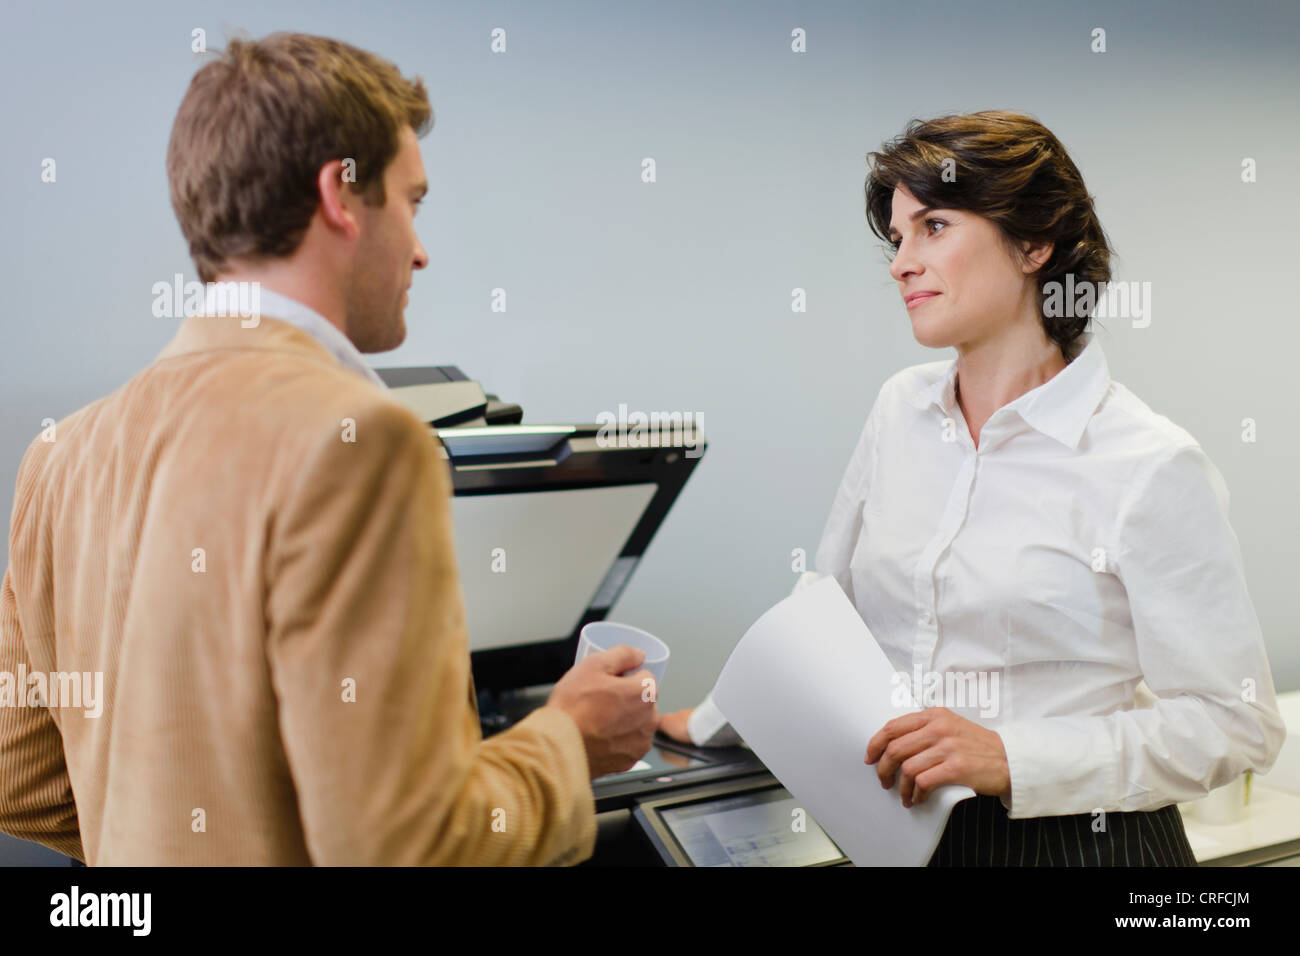 Business people talking at copier Stock Photo